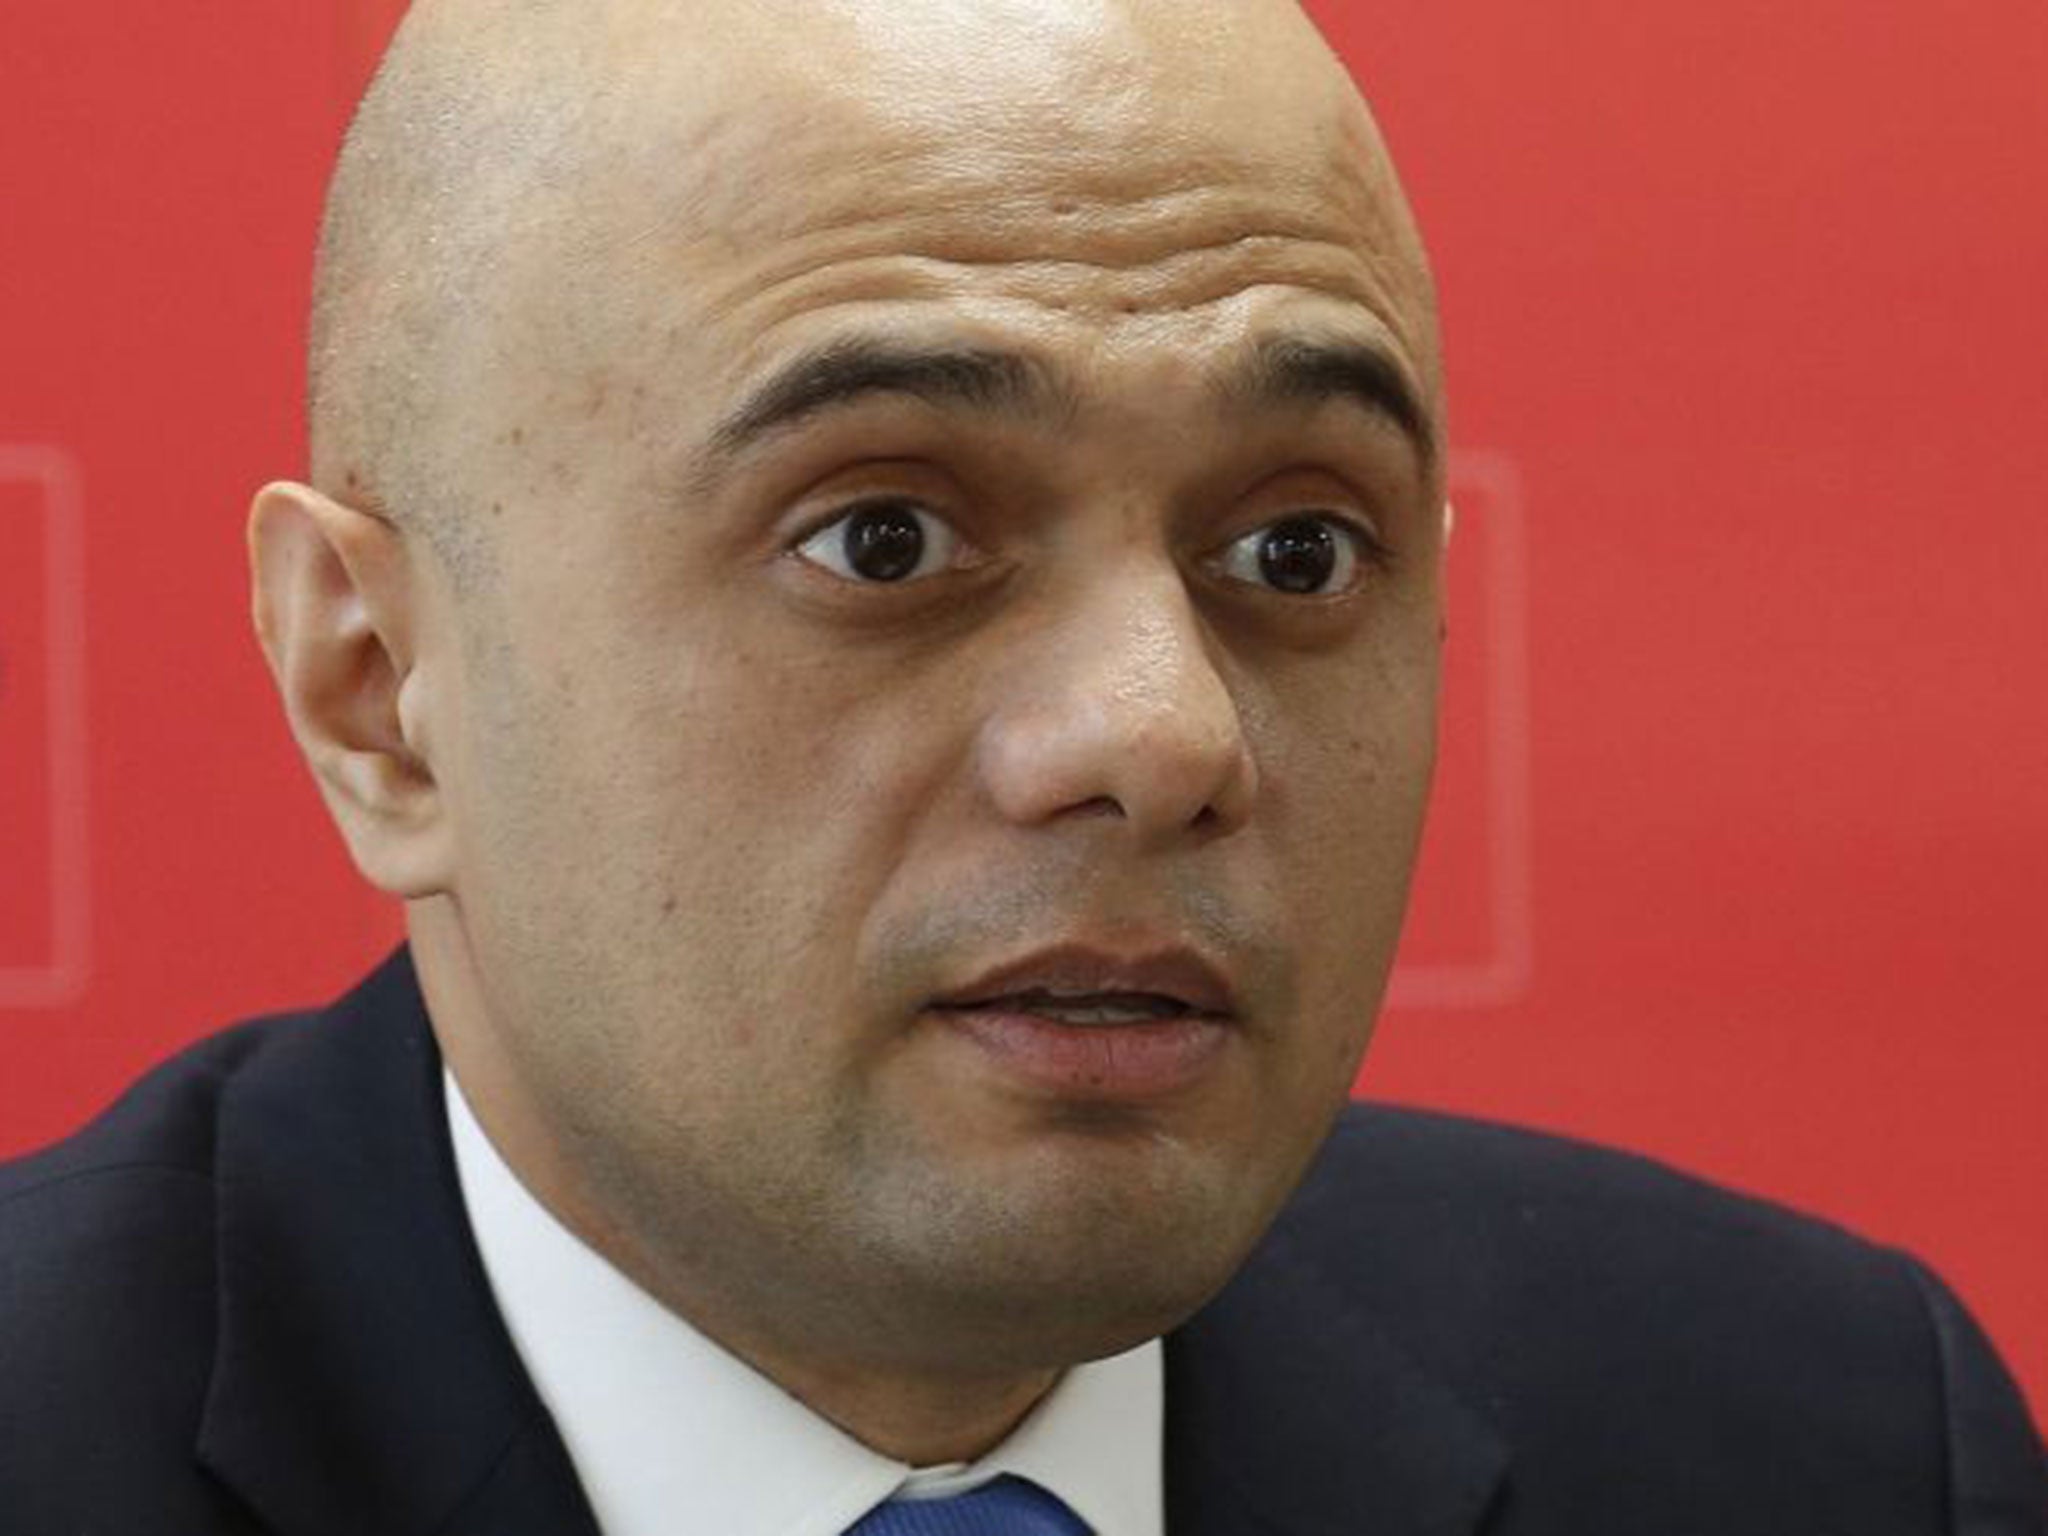 Culture Secretary Sajid Javid says immigrants coming to the UK should "try to learn English"